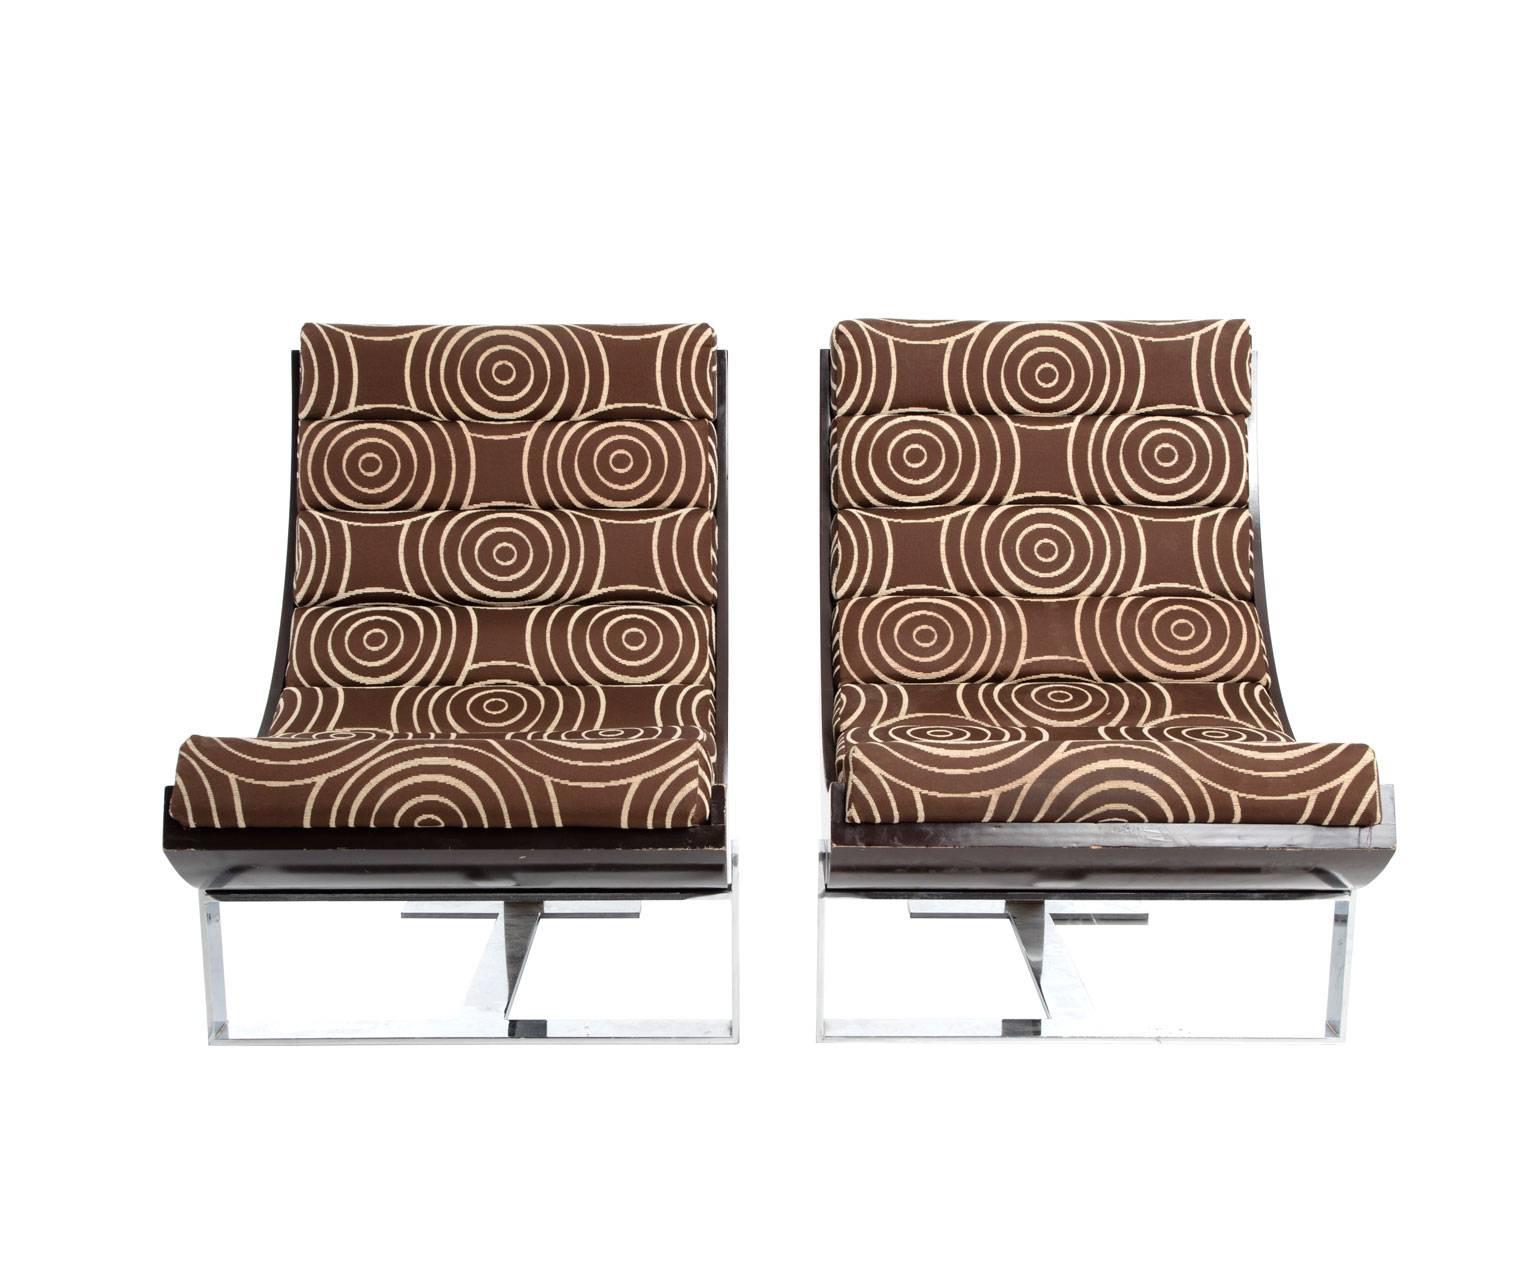 Pair of 1970s chrome and lacquer swing chairs with their original upholstery.
 